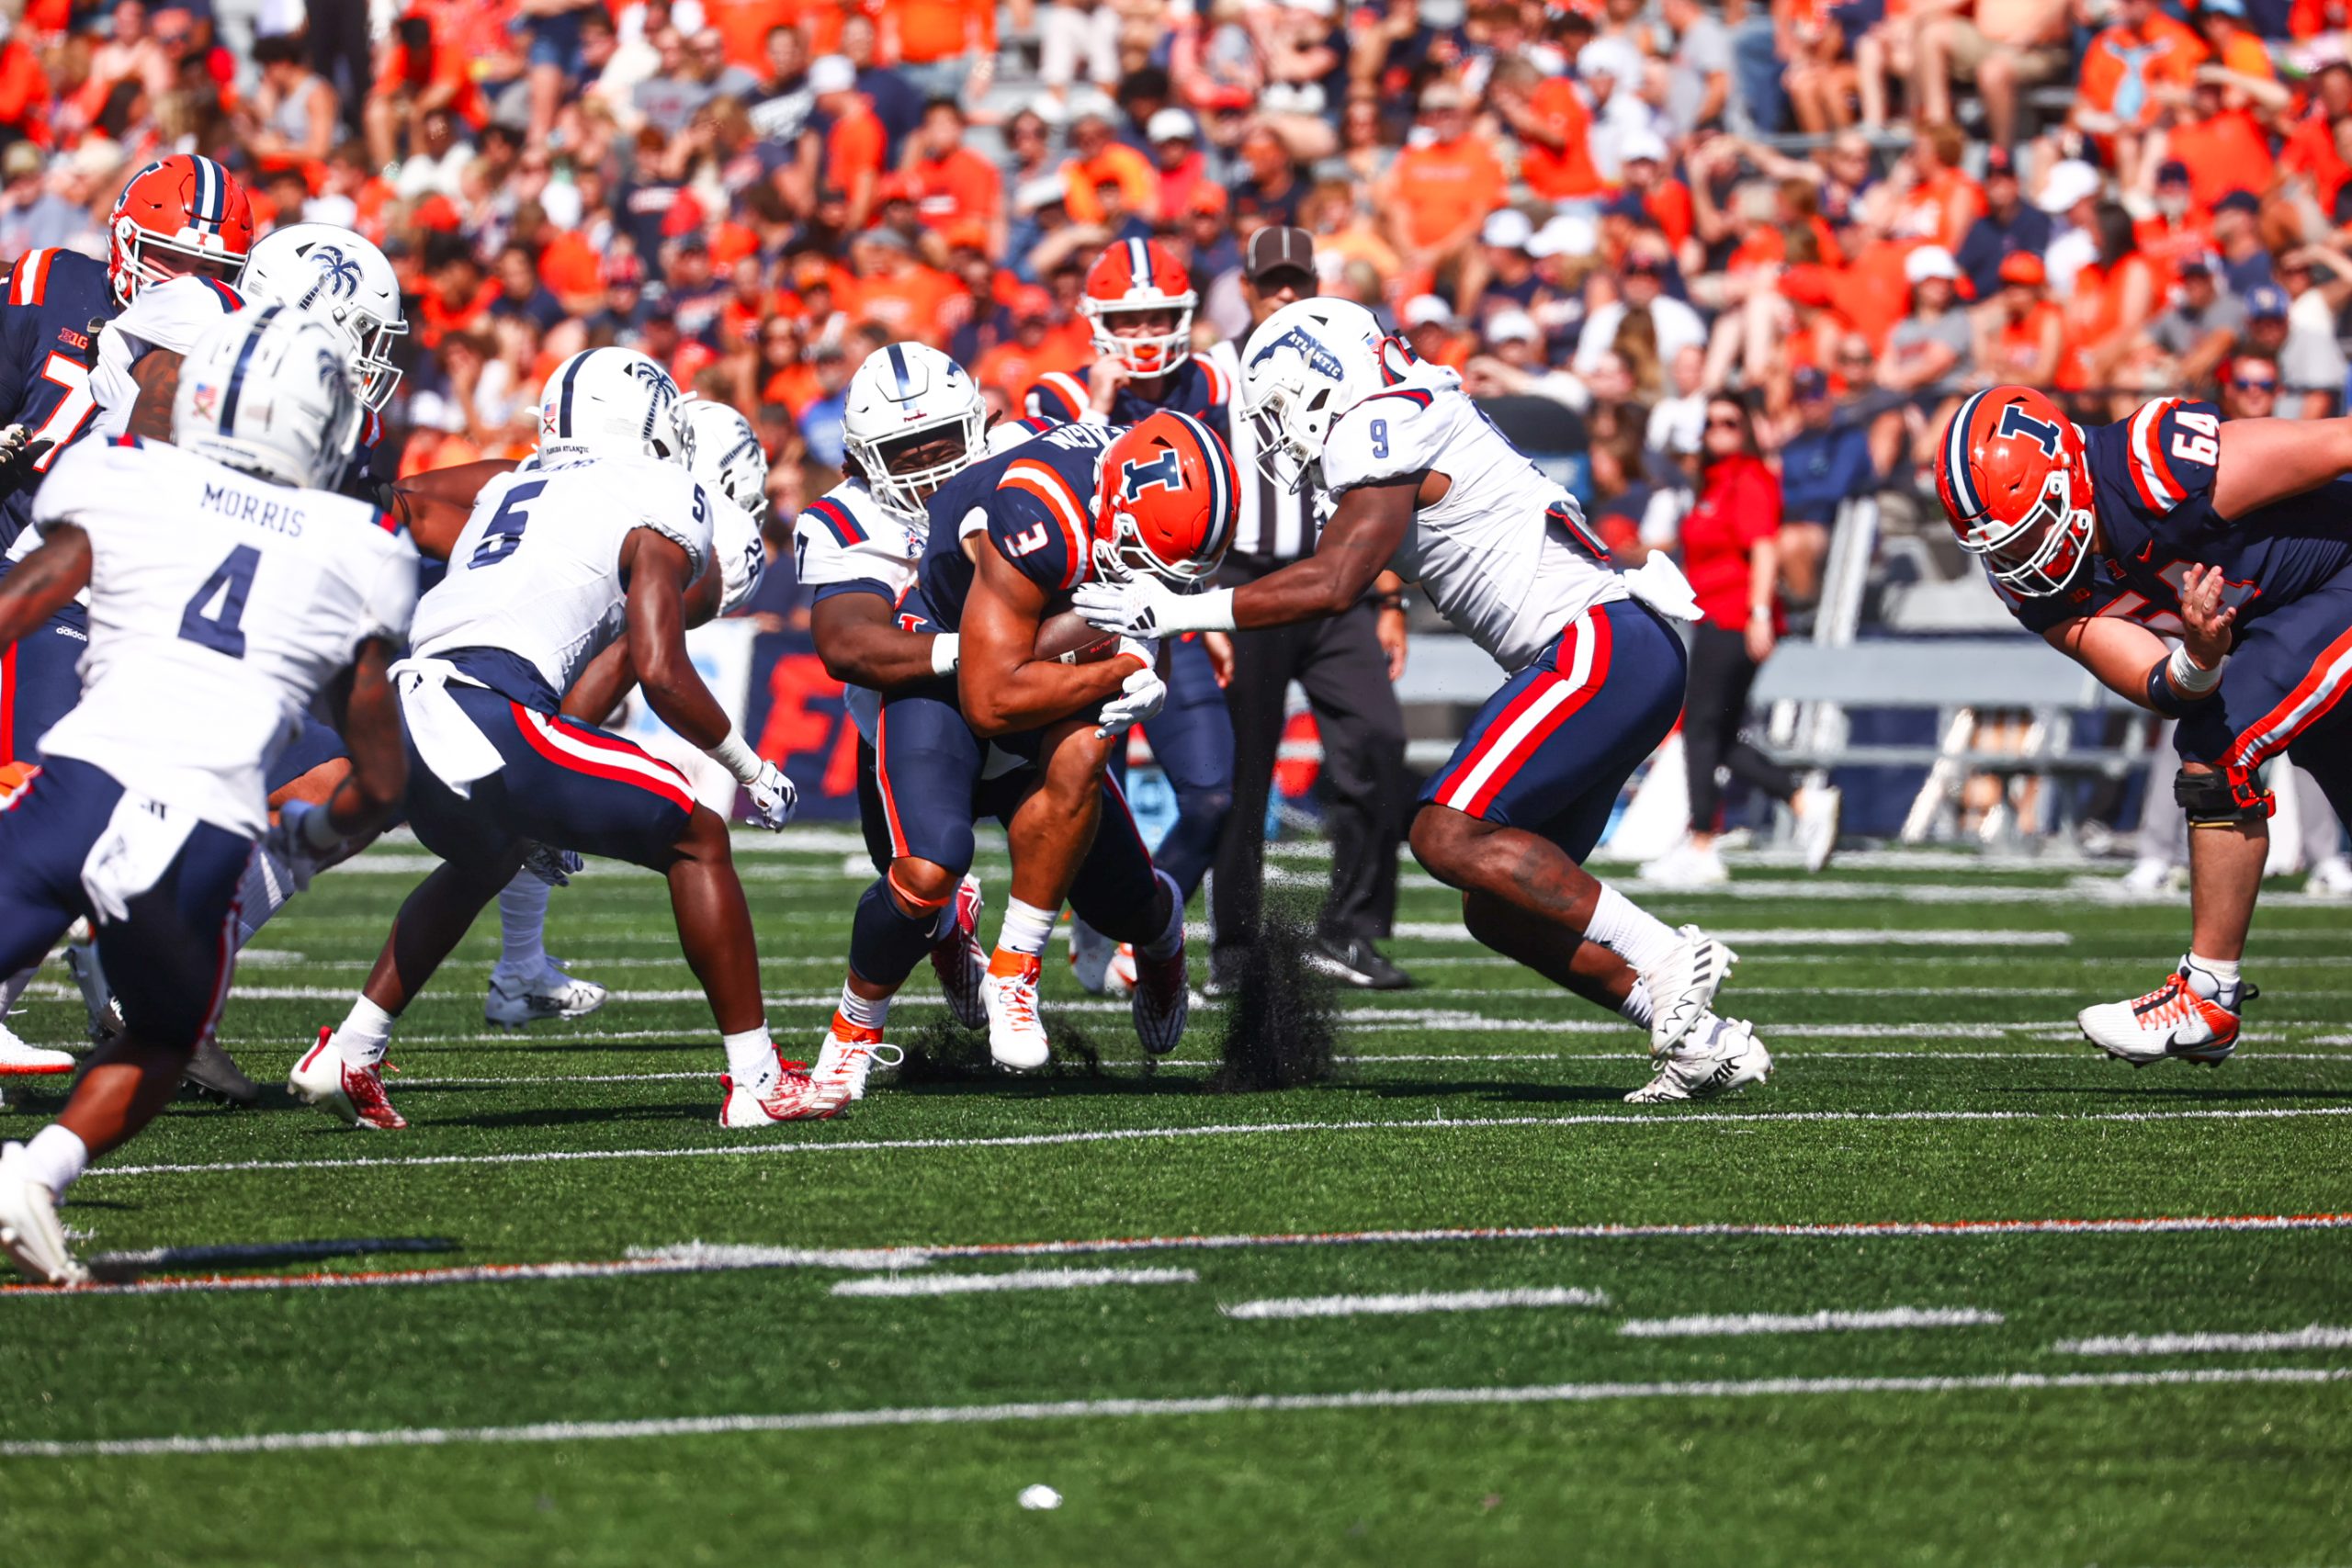 Illinois 23, Florida Atlantic 17 - Illini Film Review - Is the Illini Identity Coming With The Younger Players? 